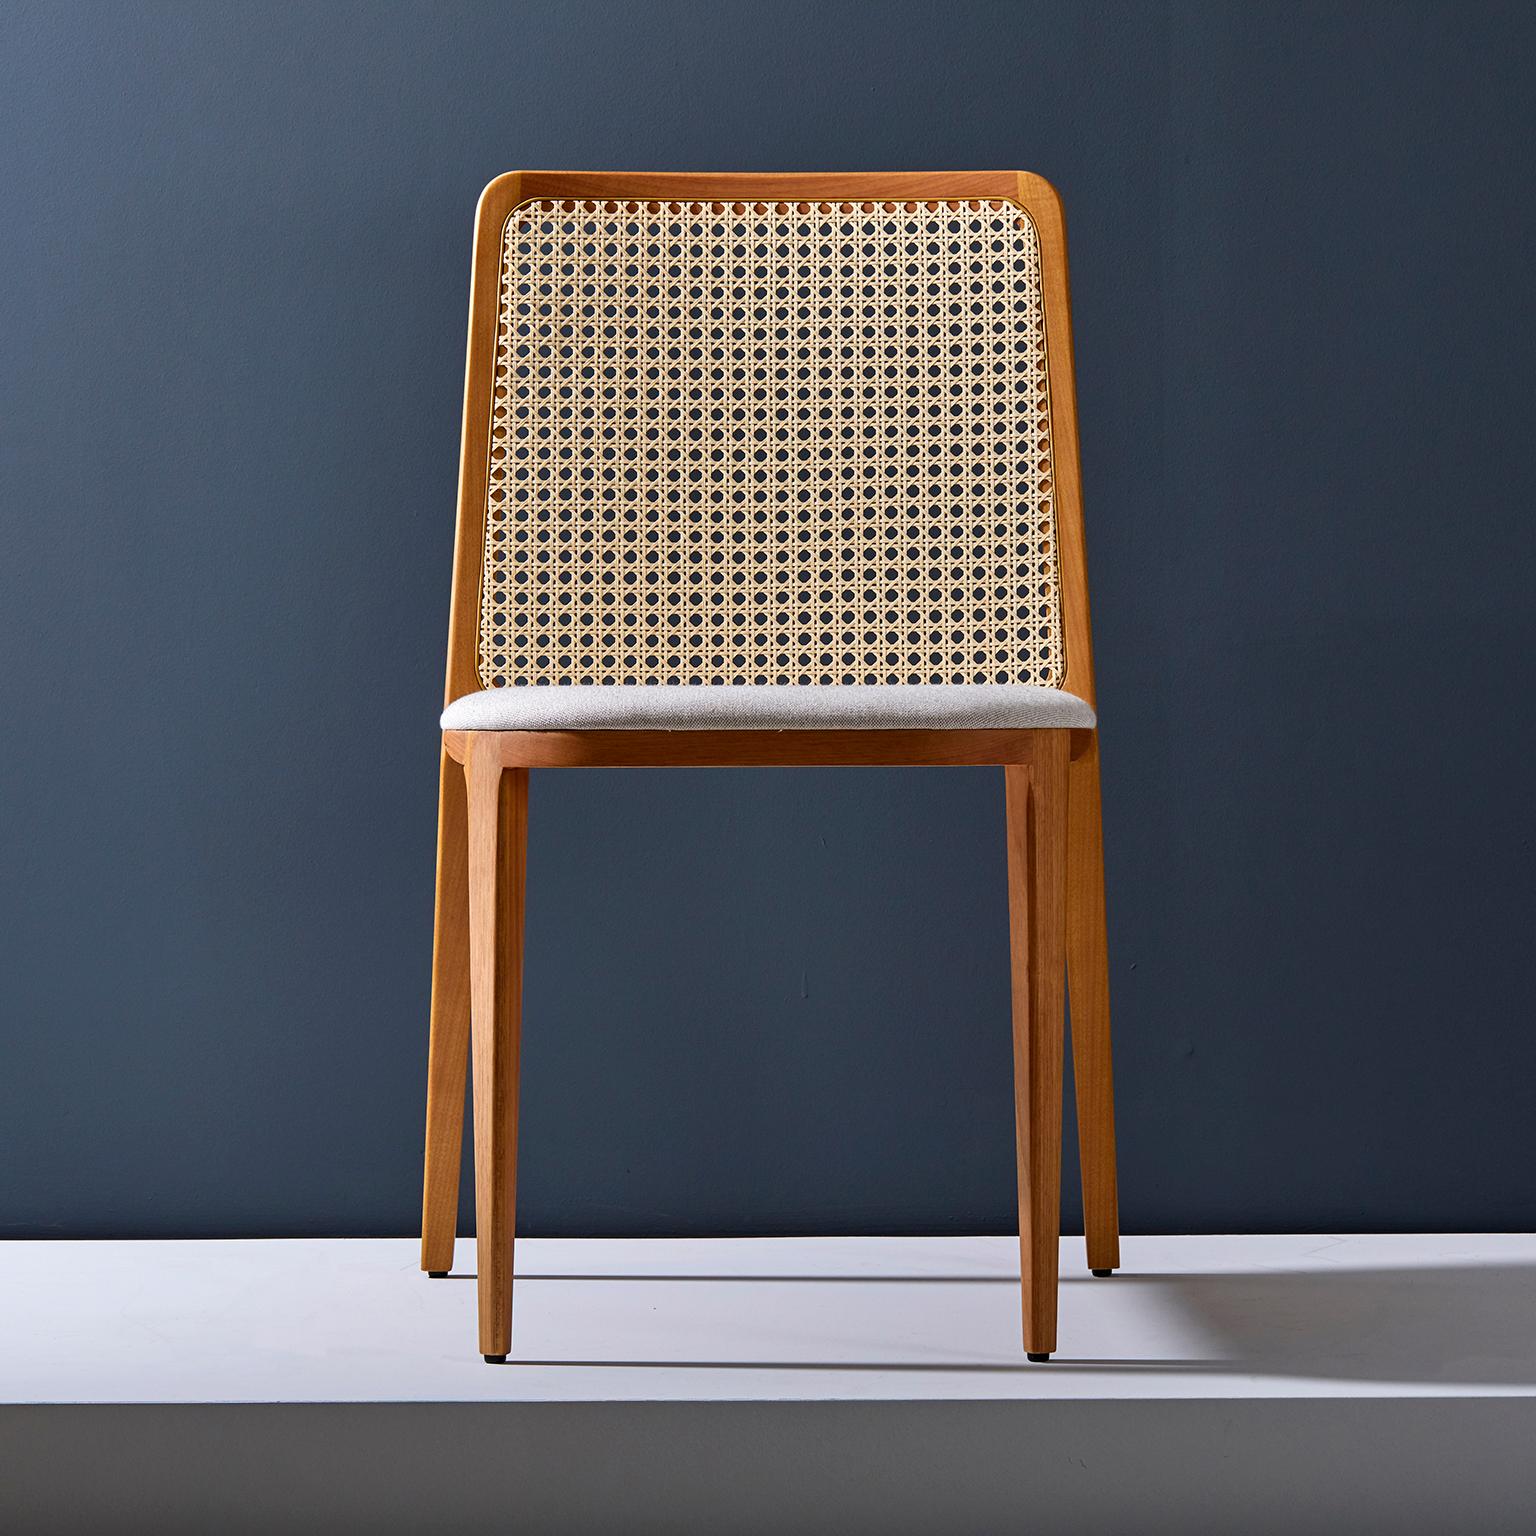 Modern Minimal style, solid wood chair, textiles or leather seatings, caning backboard For Sale